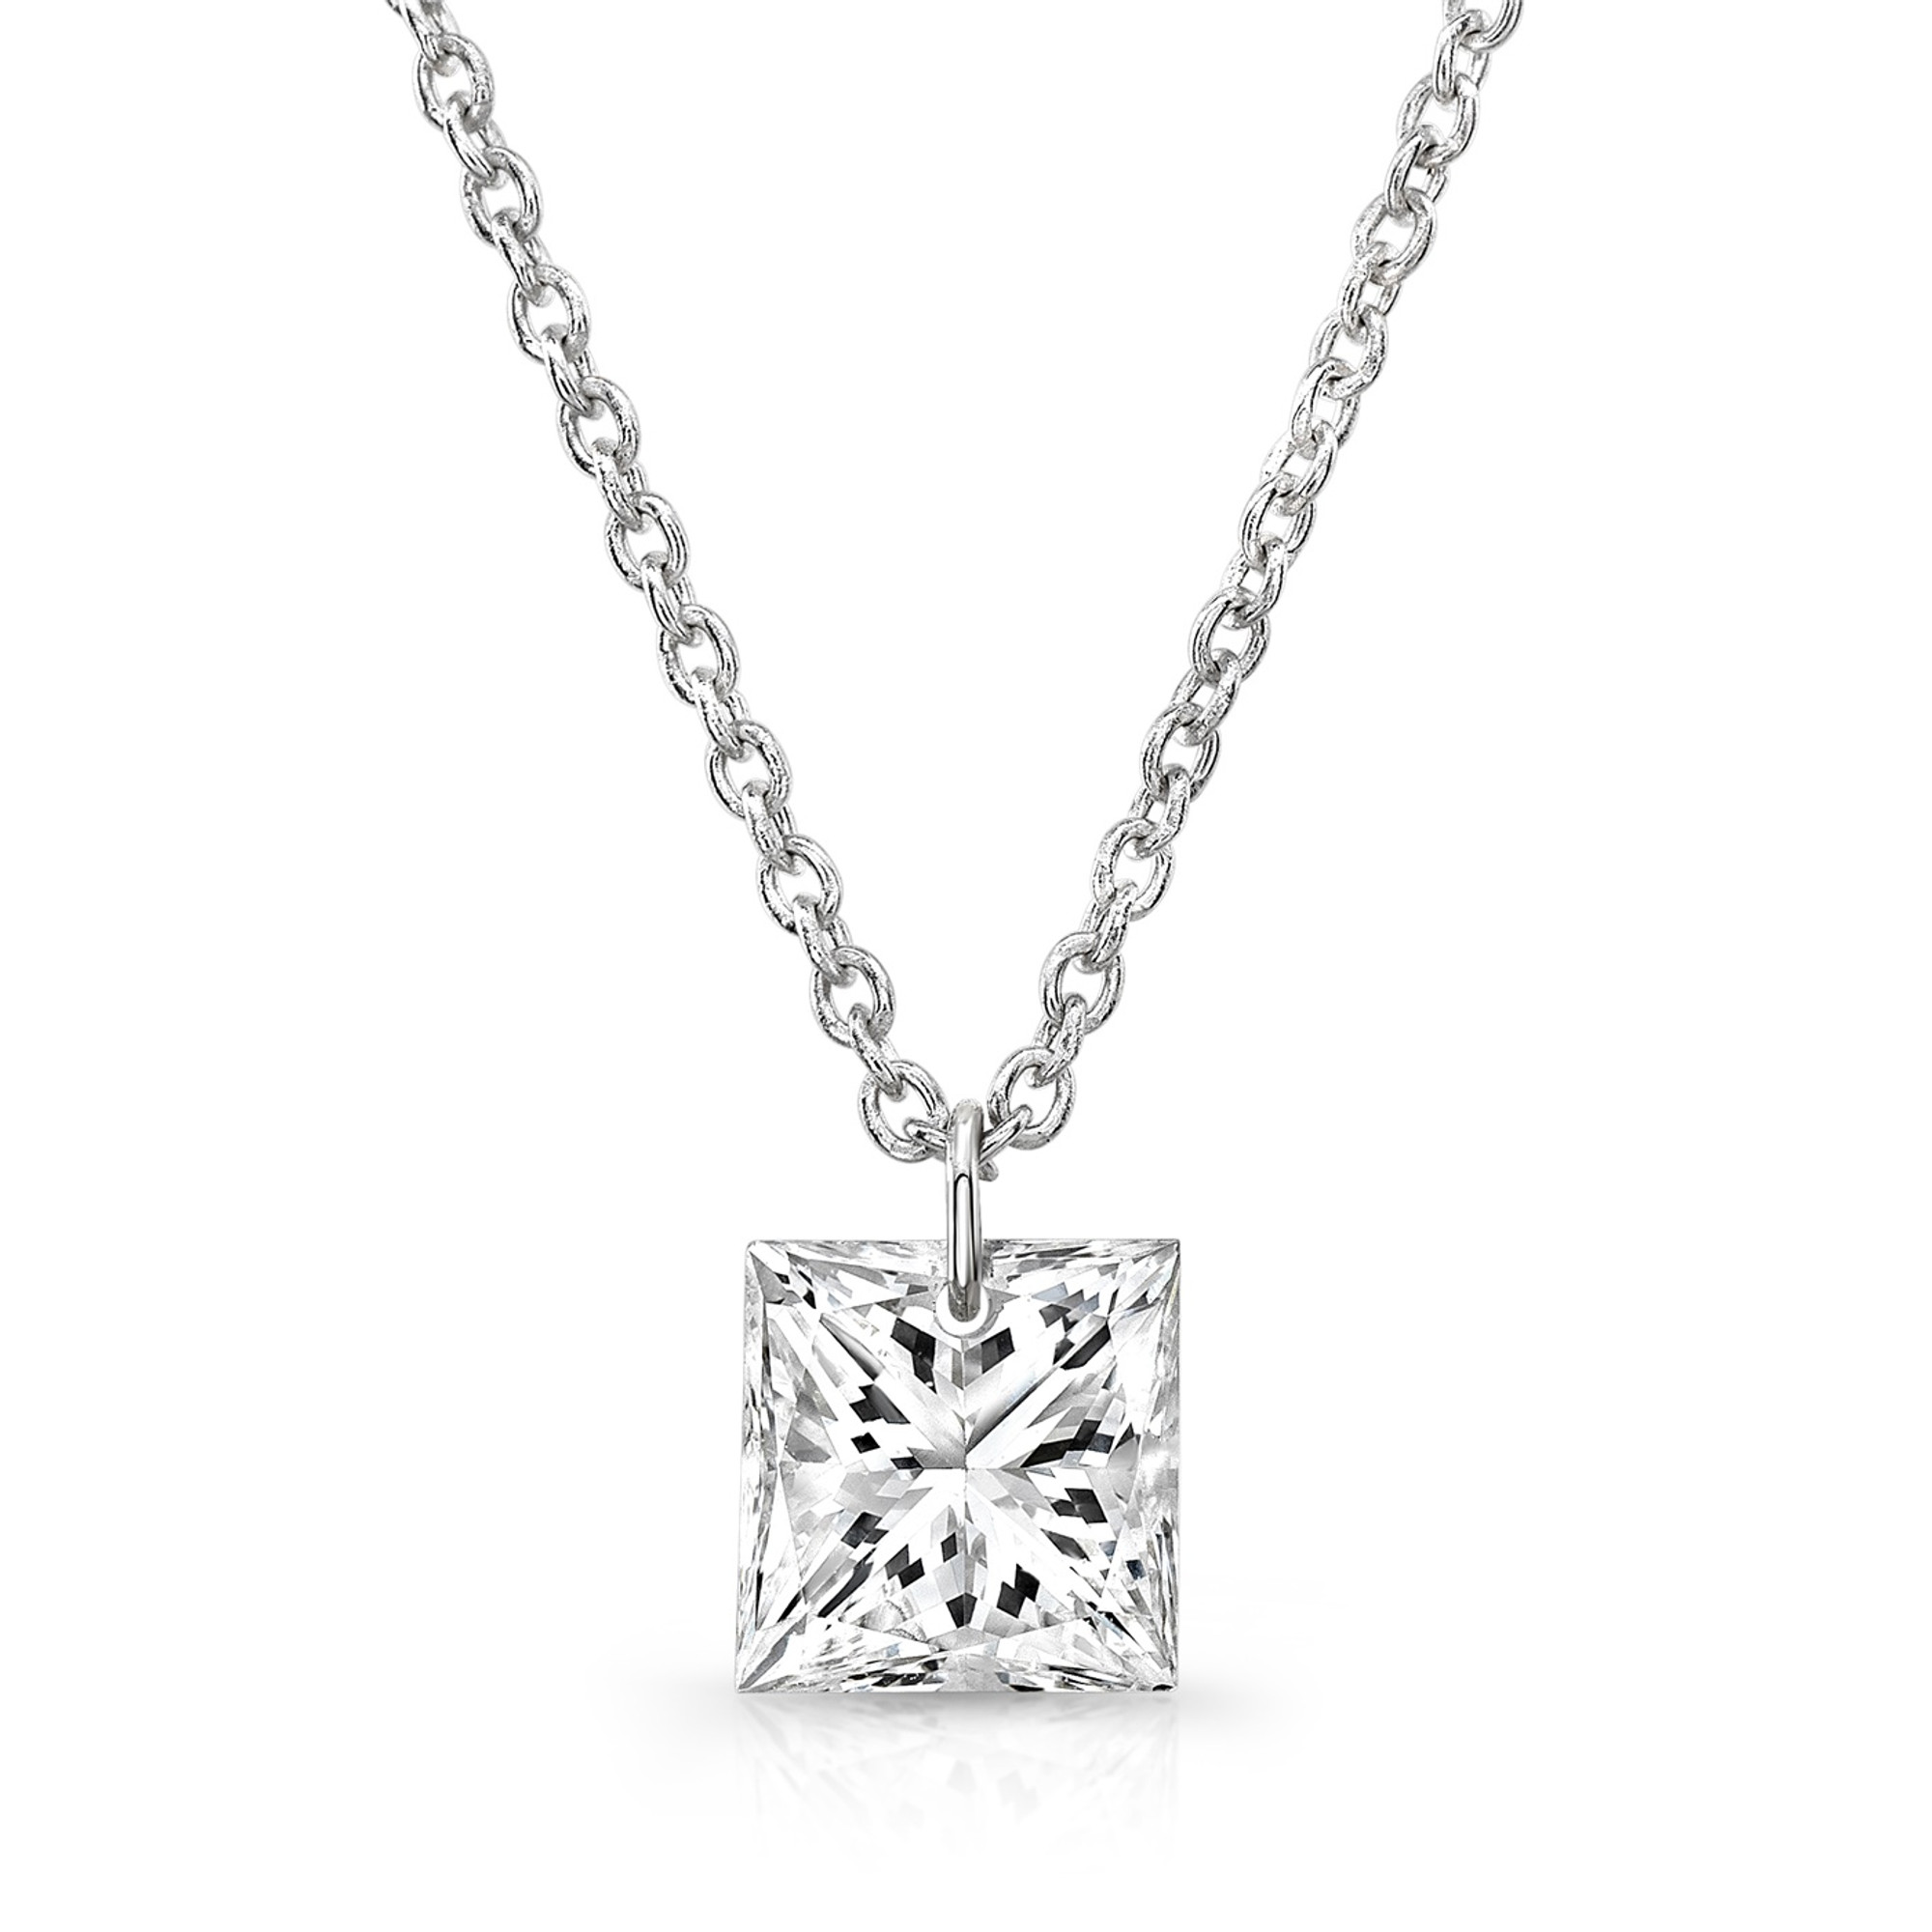 Buy Certified Princess Cut Diamond Pendant With Round and Baguette Cut  Diamonds Made in Solid Gold or Platinum Gift for Her Online in India - Etsy